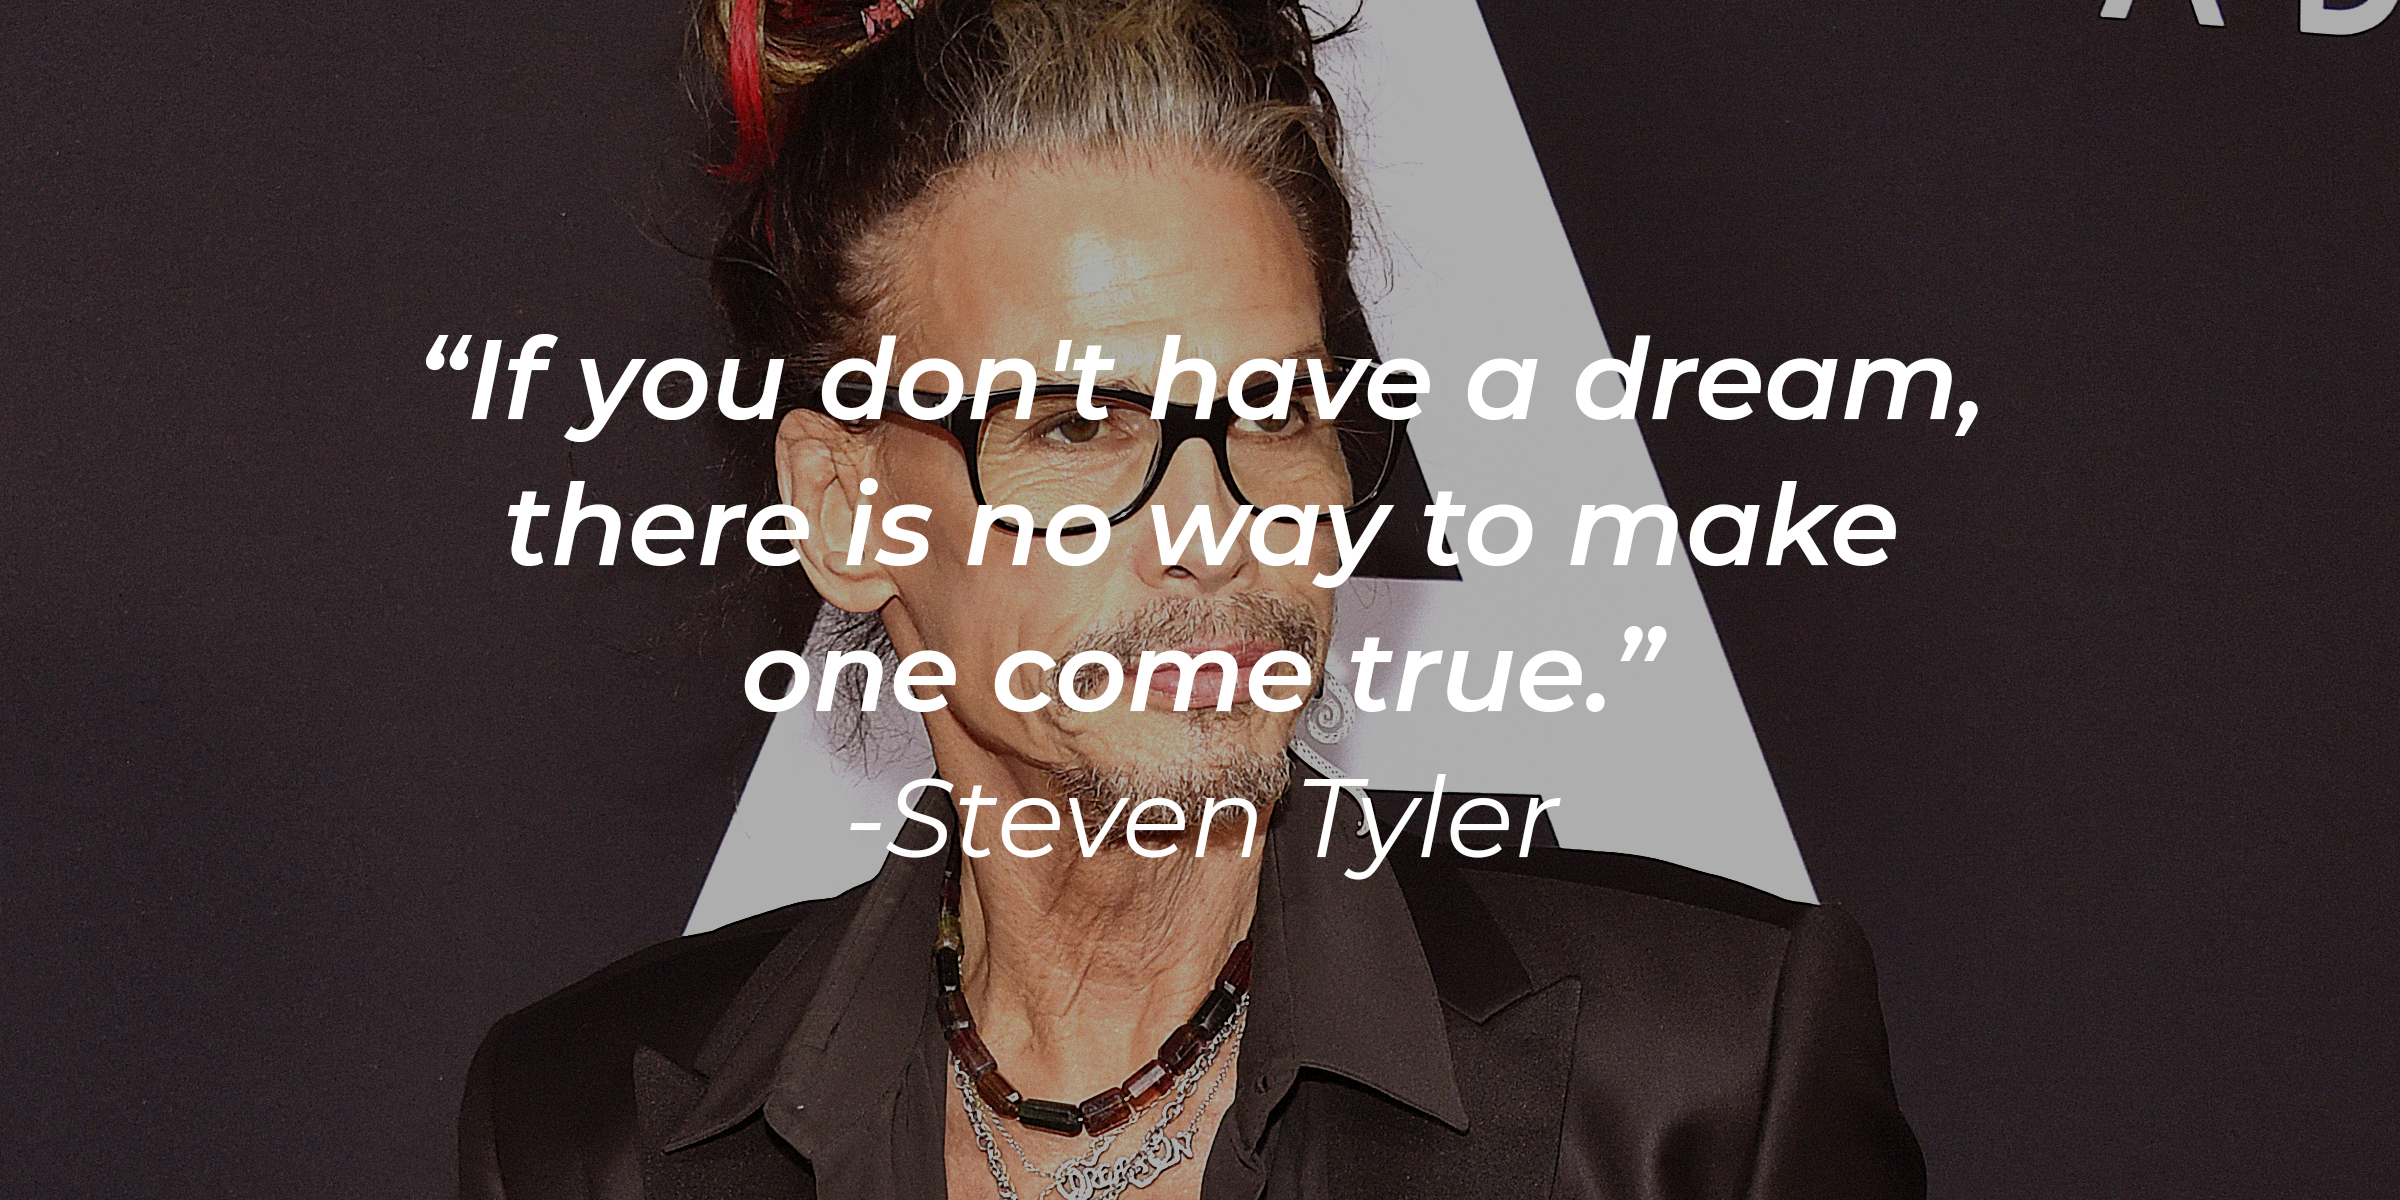 A photo of Steven Tyler with the quote, "If you don't have a dream, there is no way to make one come true." | Source: Getty Images